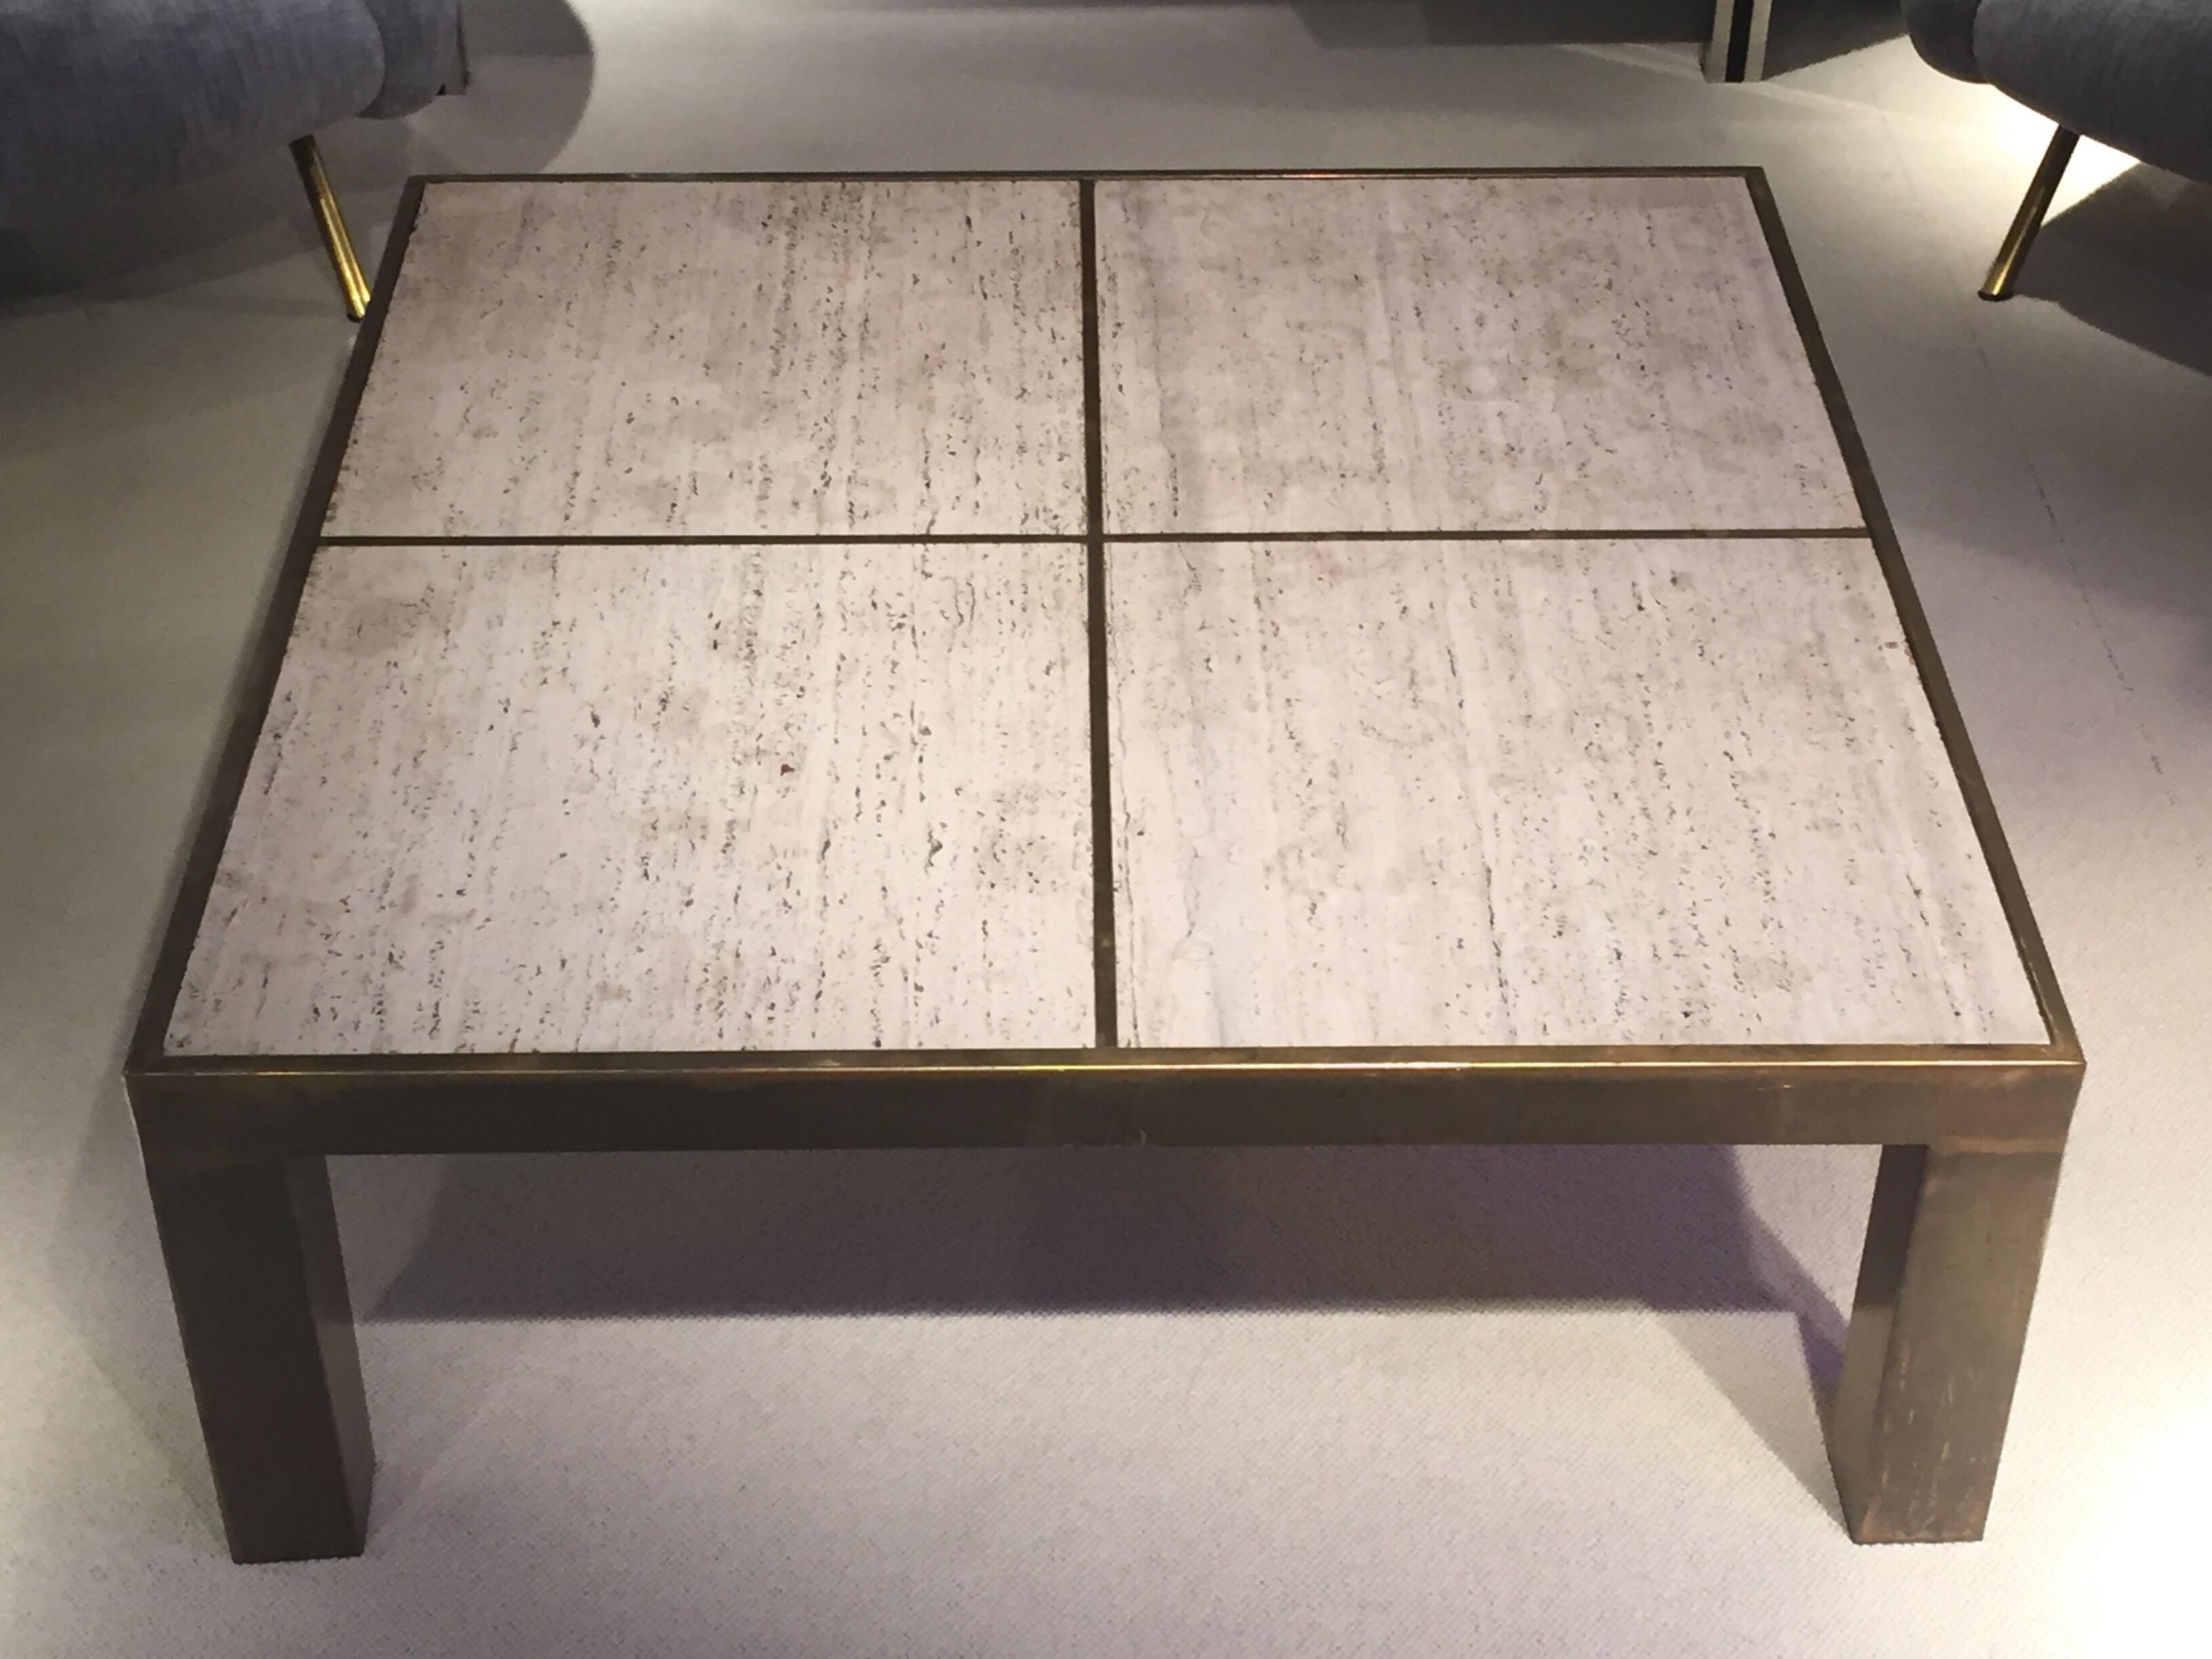 1970s brass coffee table and travertine top.
Marks on marble.